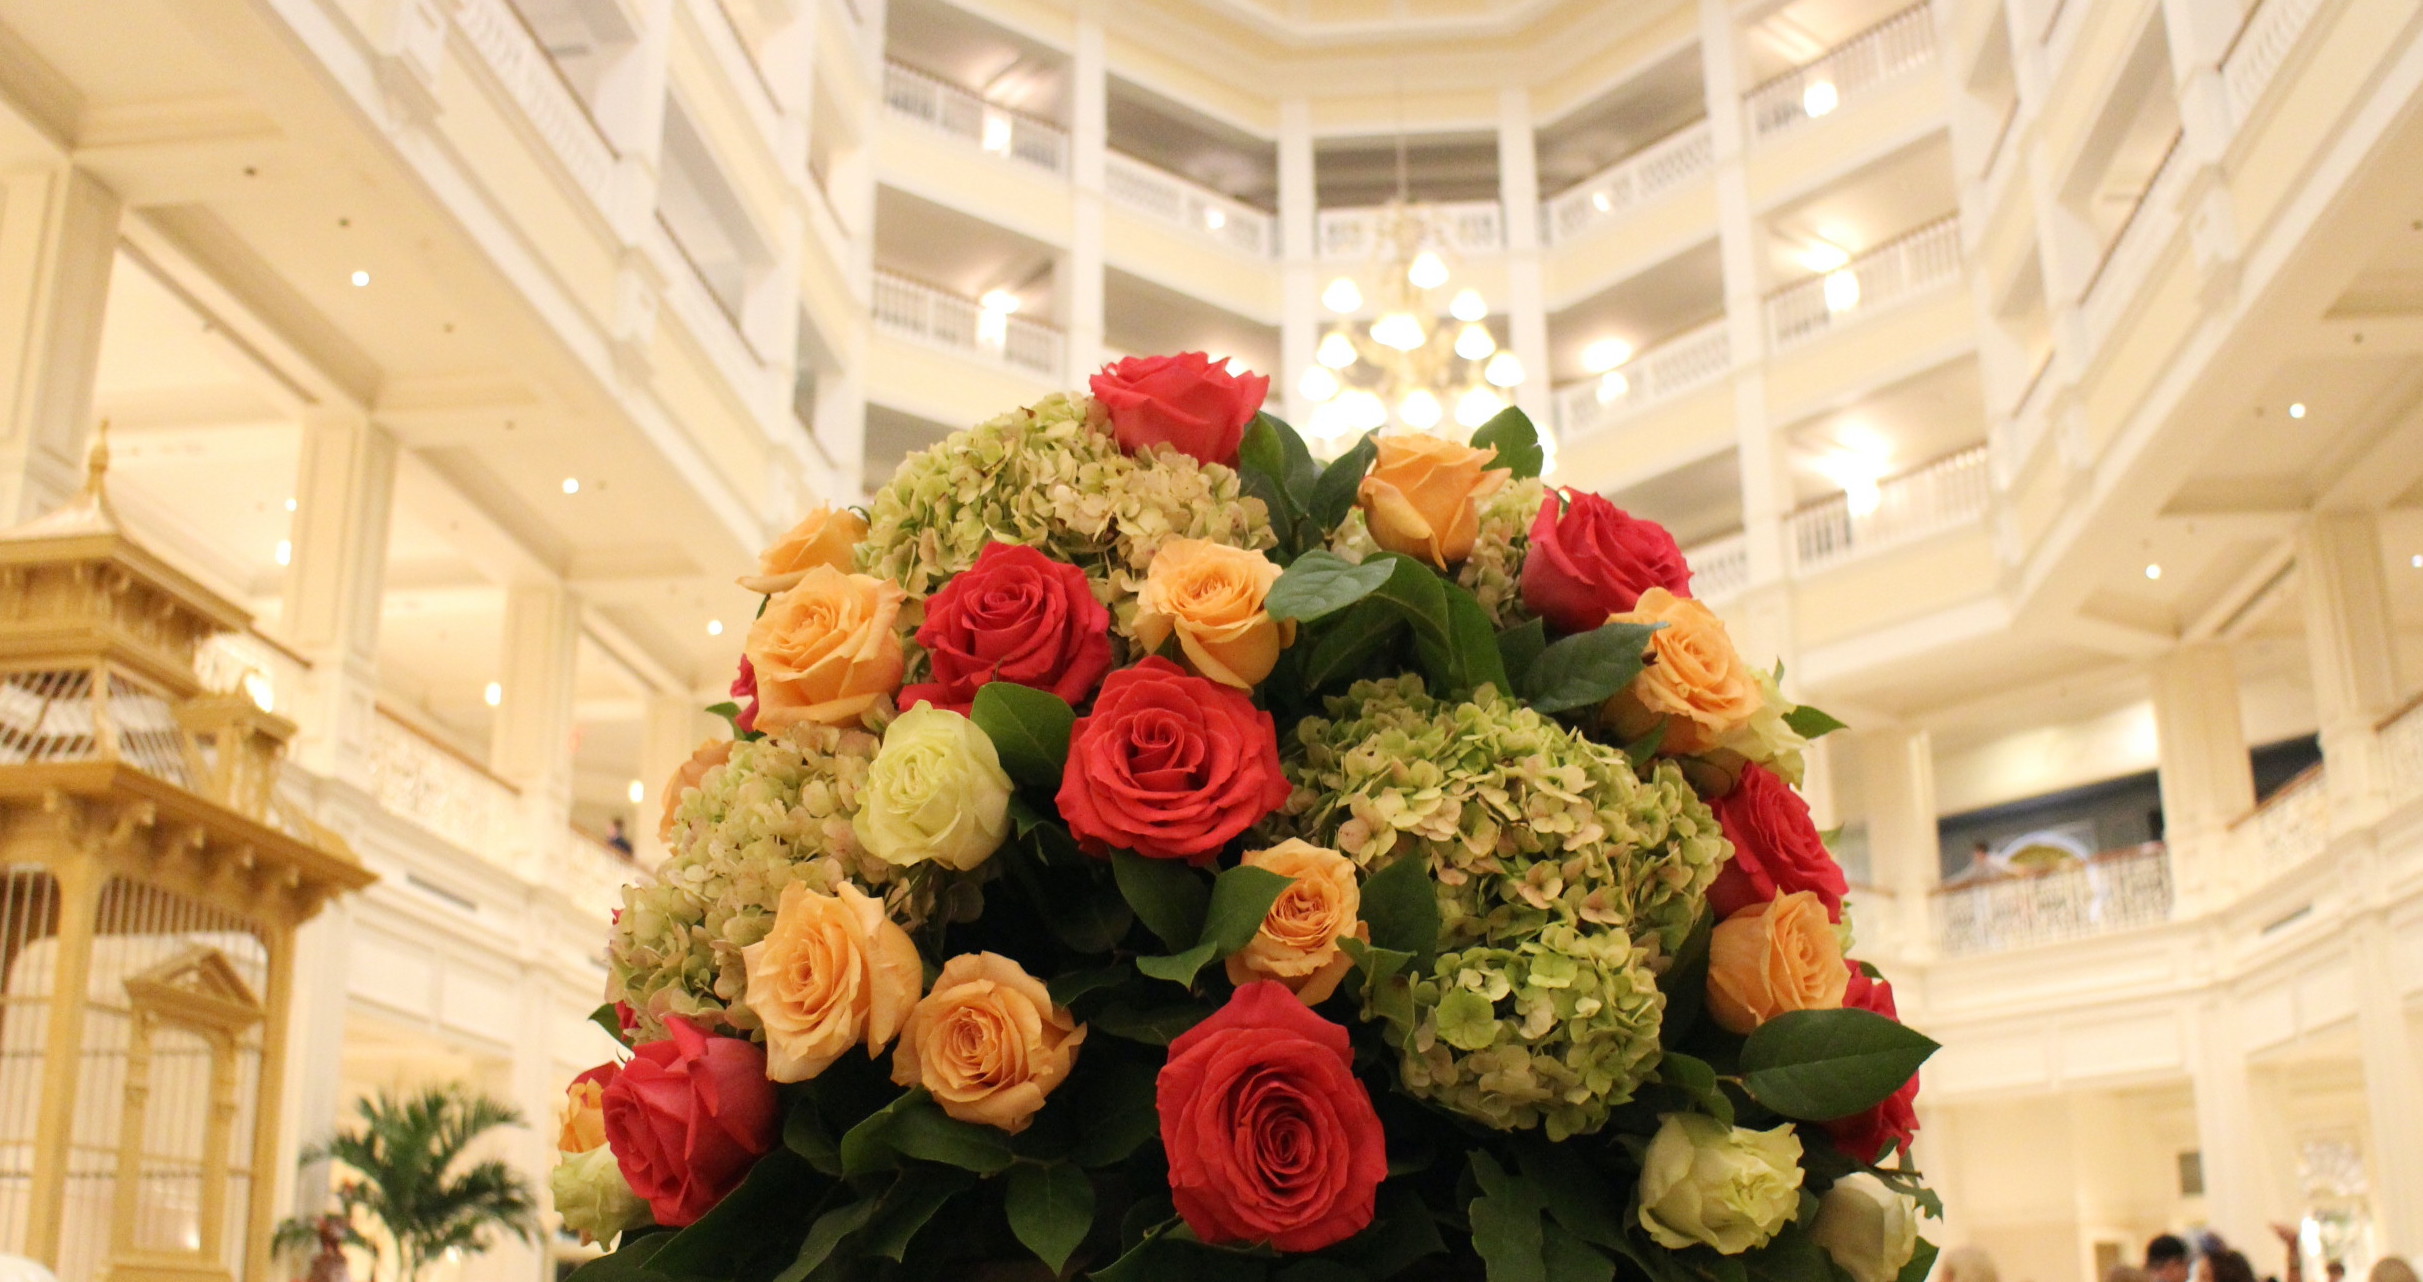 A large floral arrangement featuring roses and hydrangeas with the Grand Floridian resort's bright, multi-story lobby behind it